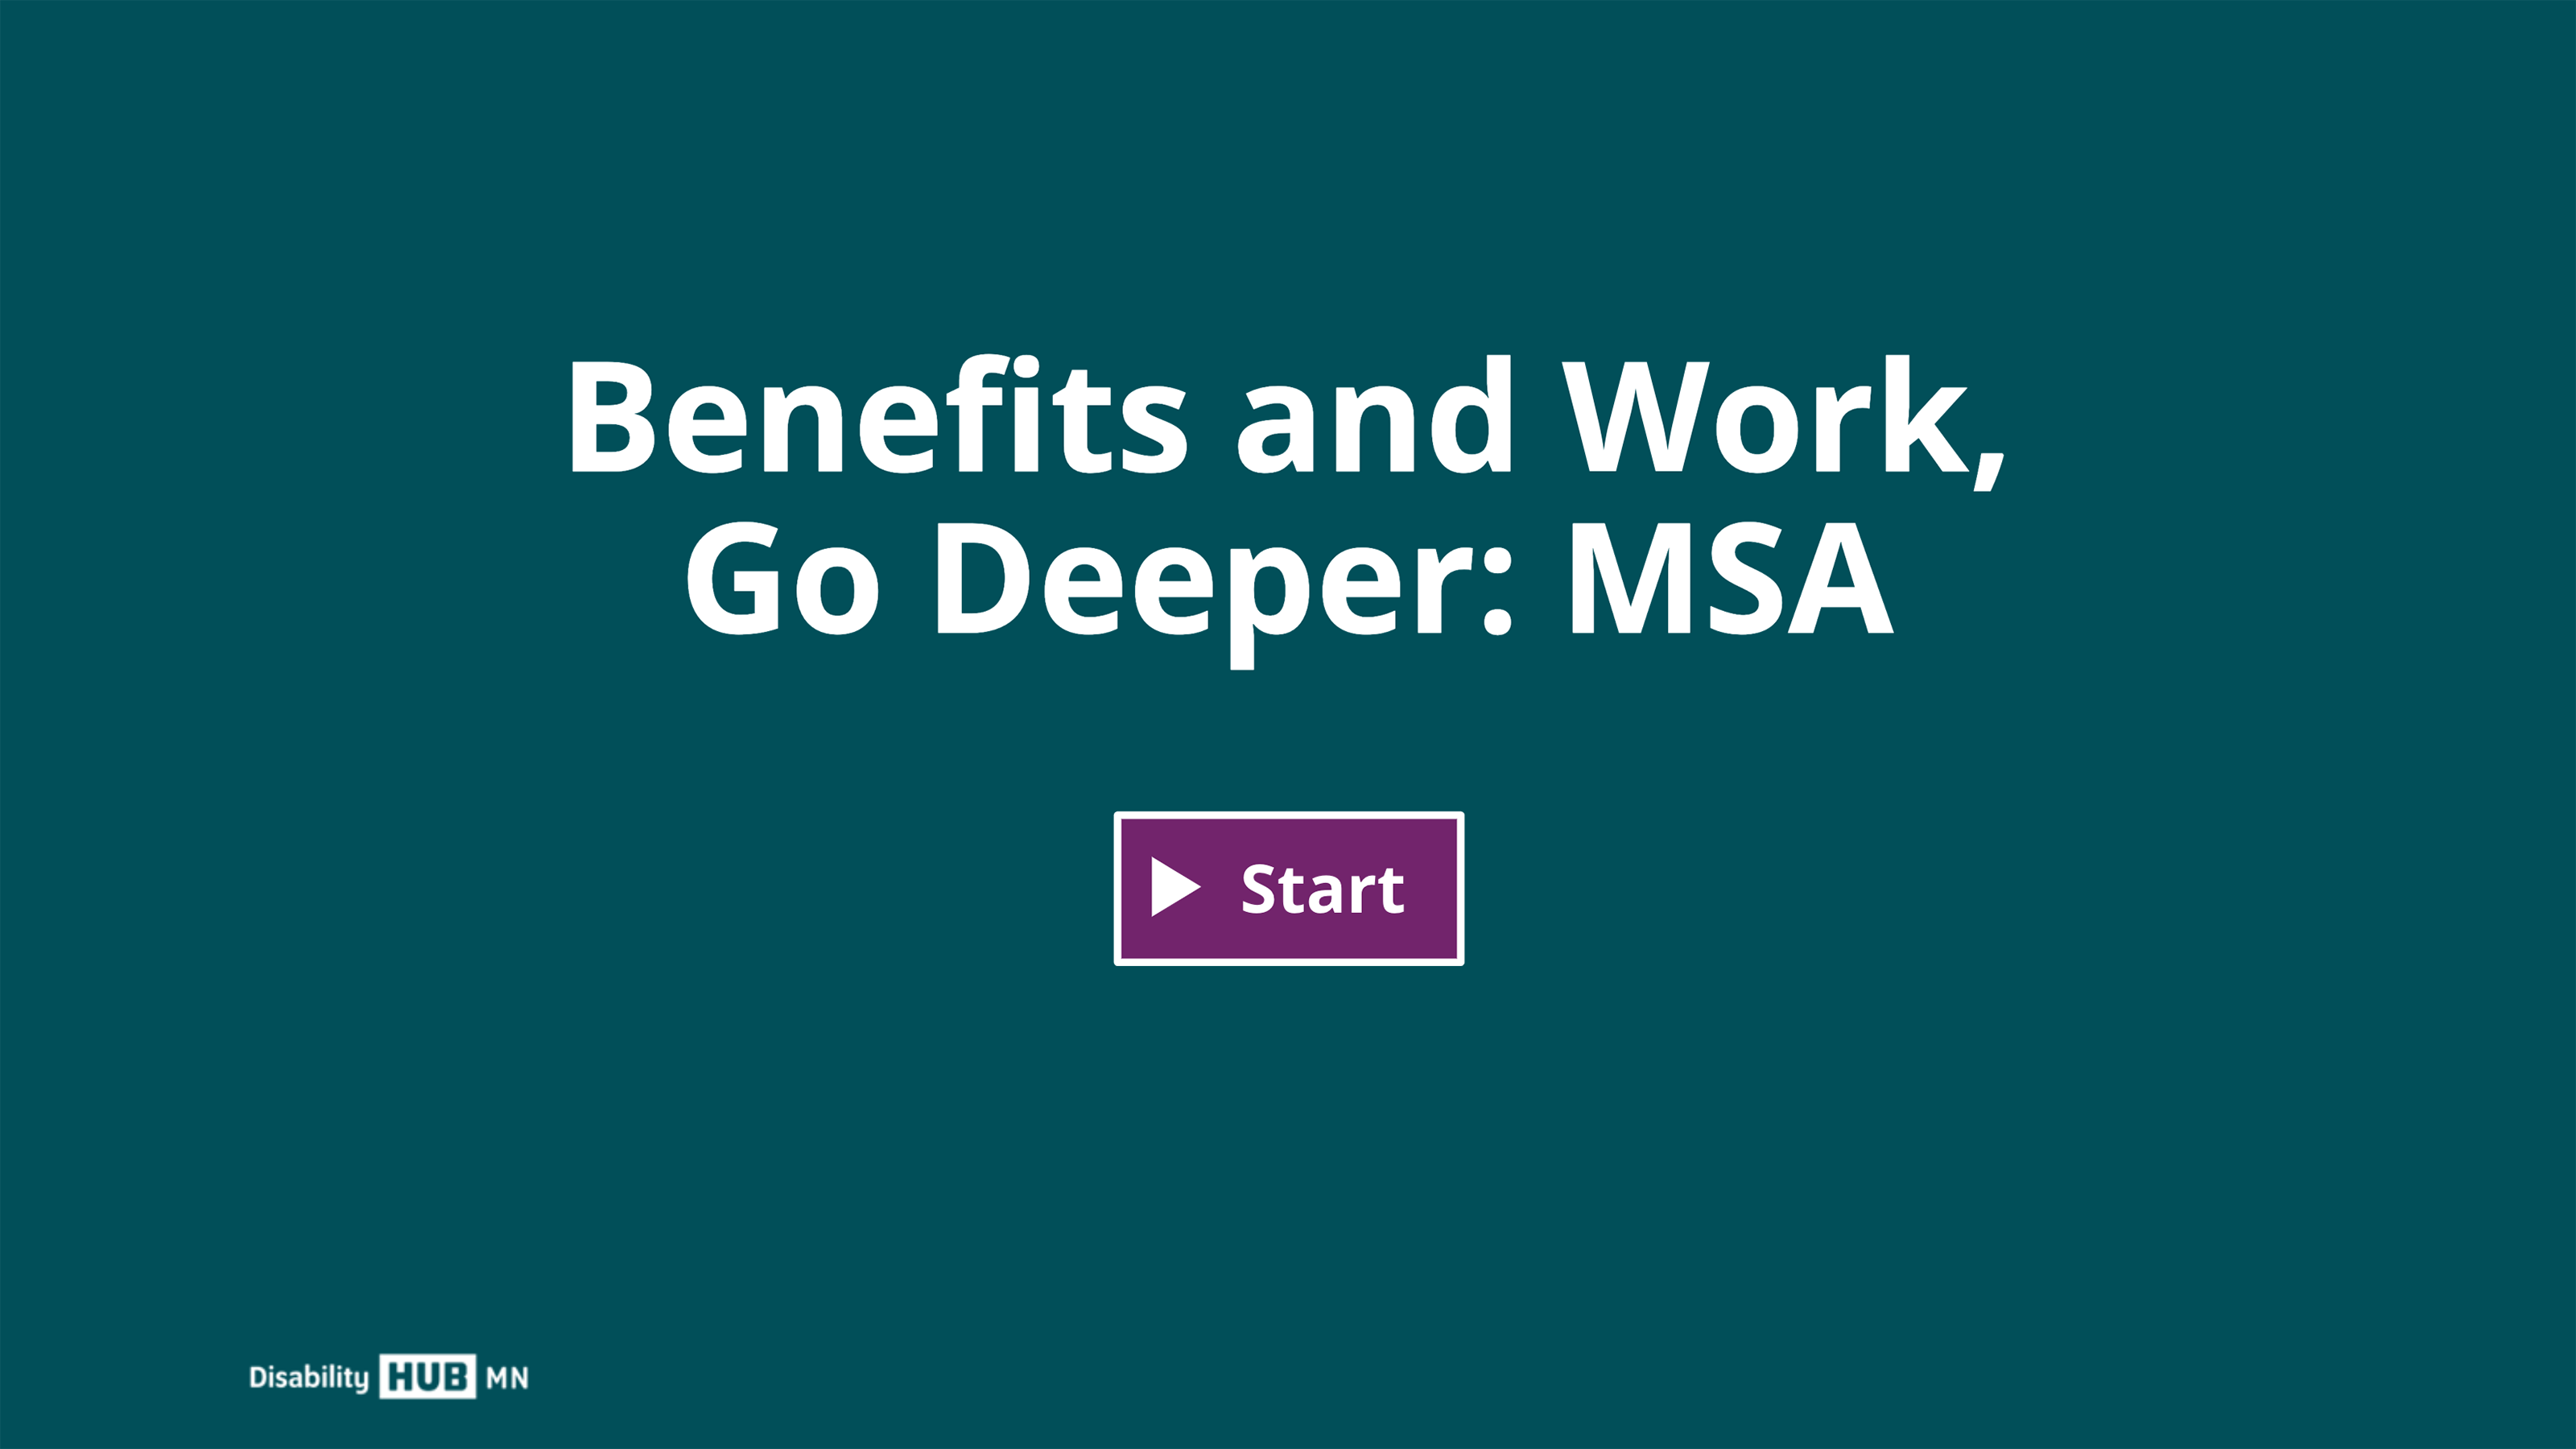 Click this image to begin the Benefits and Work, Go Deeper: MSA e-learning